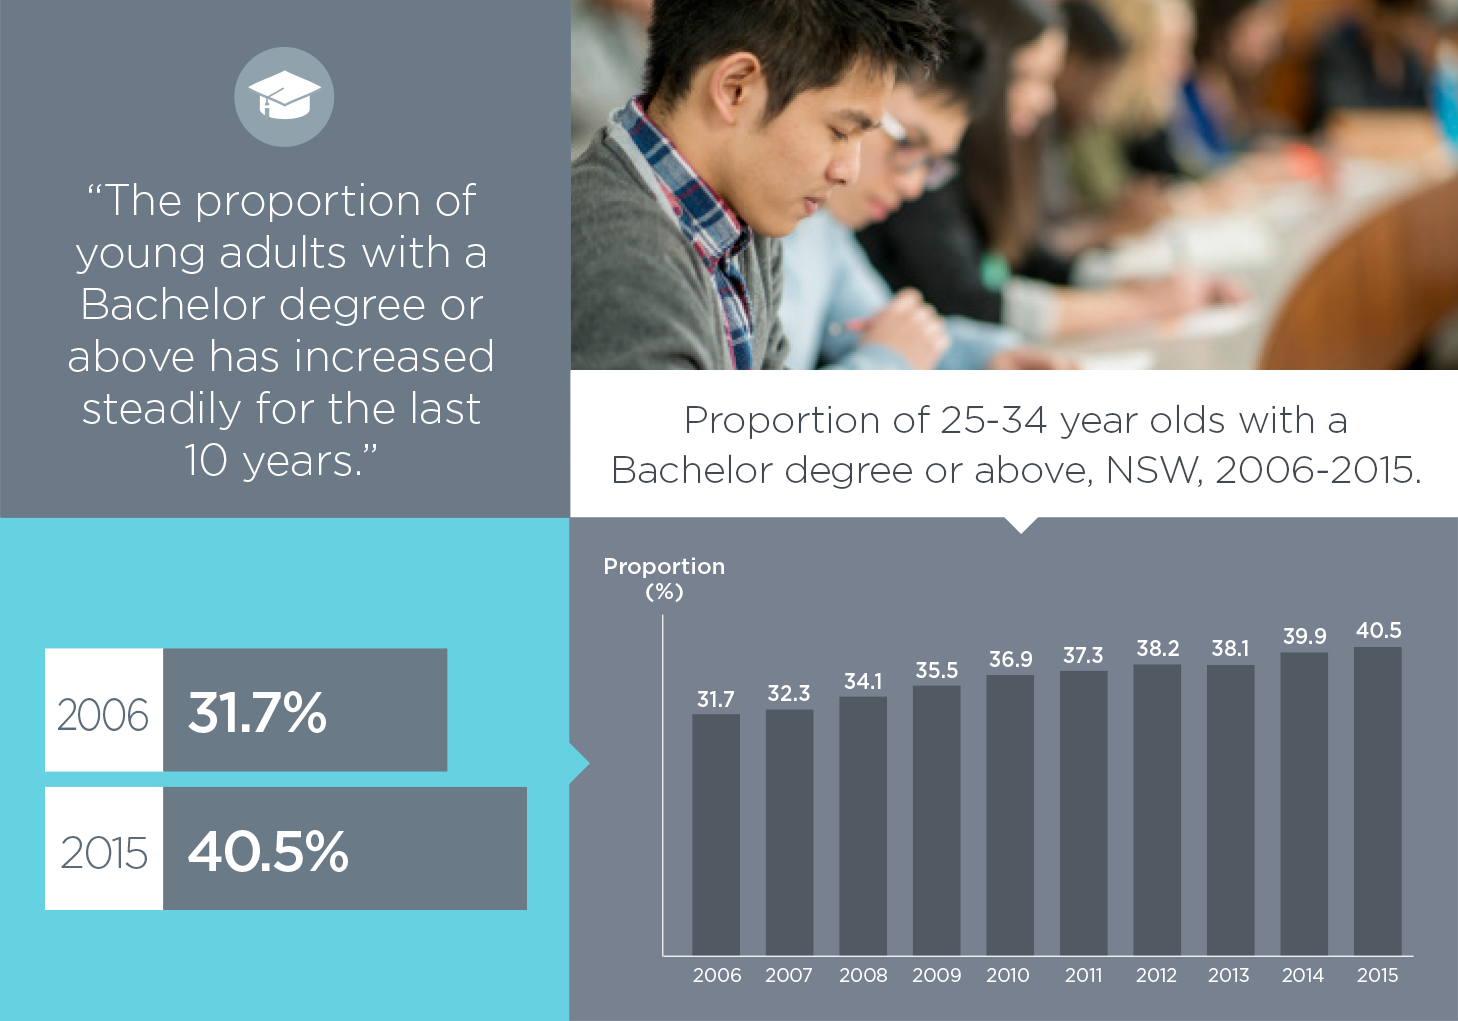 The proportion of 25-34 year olds with a Bachelor degree or above has increased steadily for the last ten years.